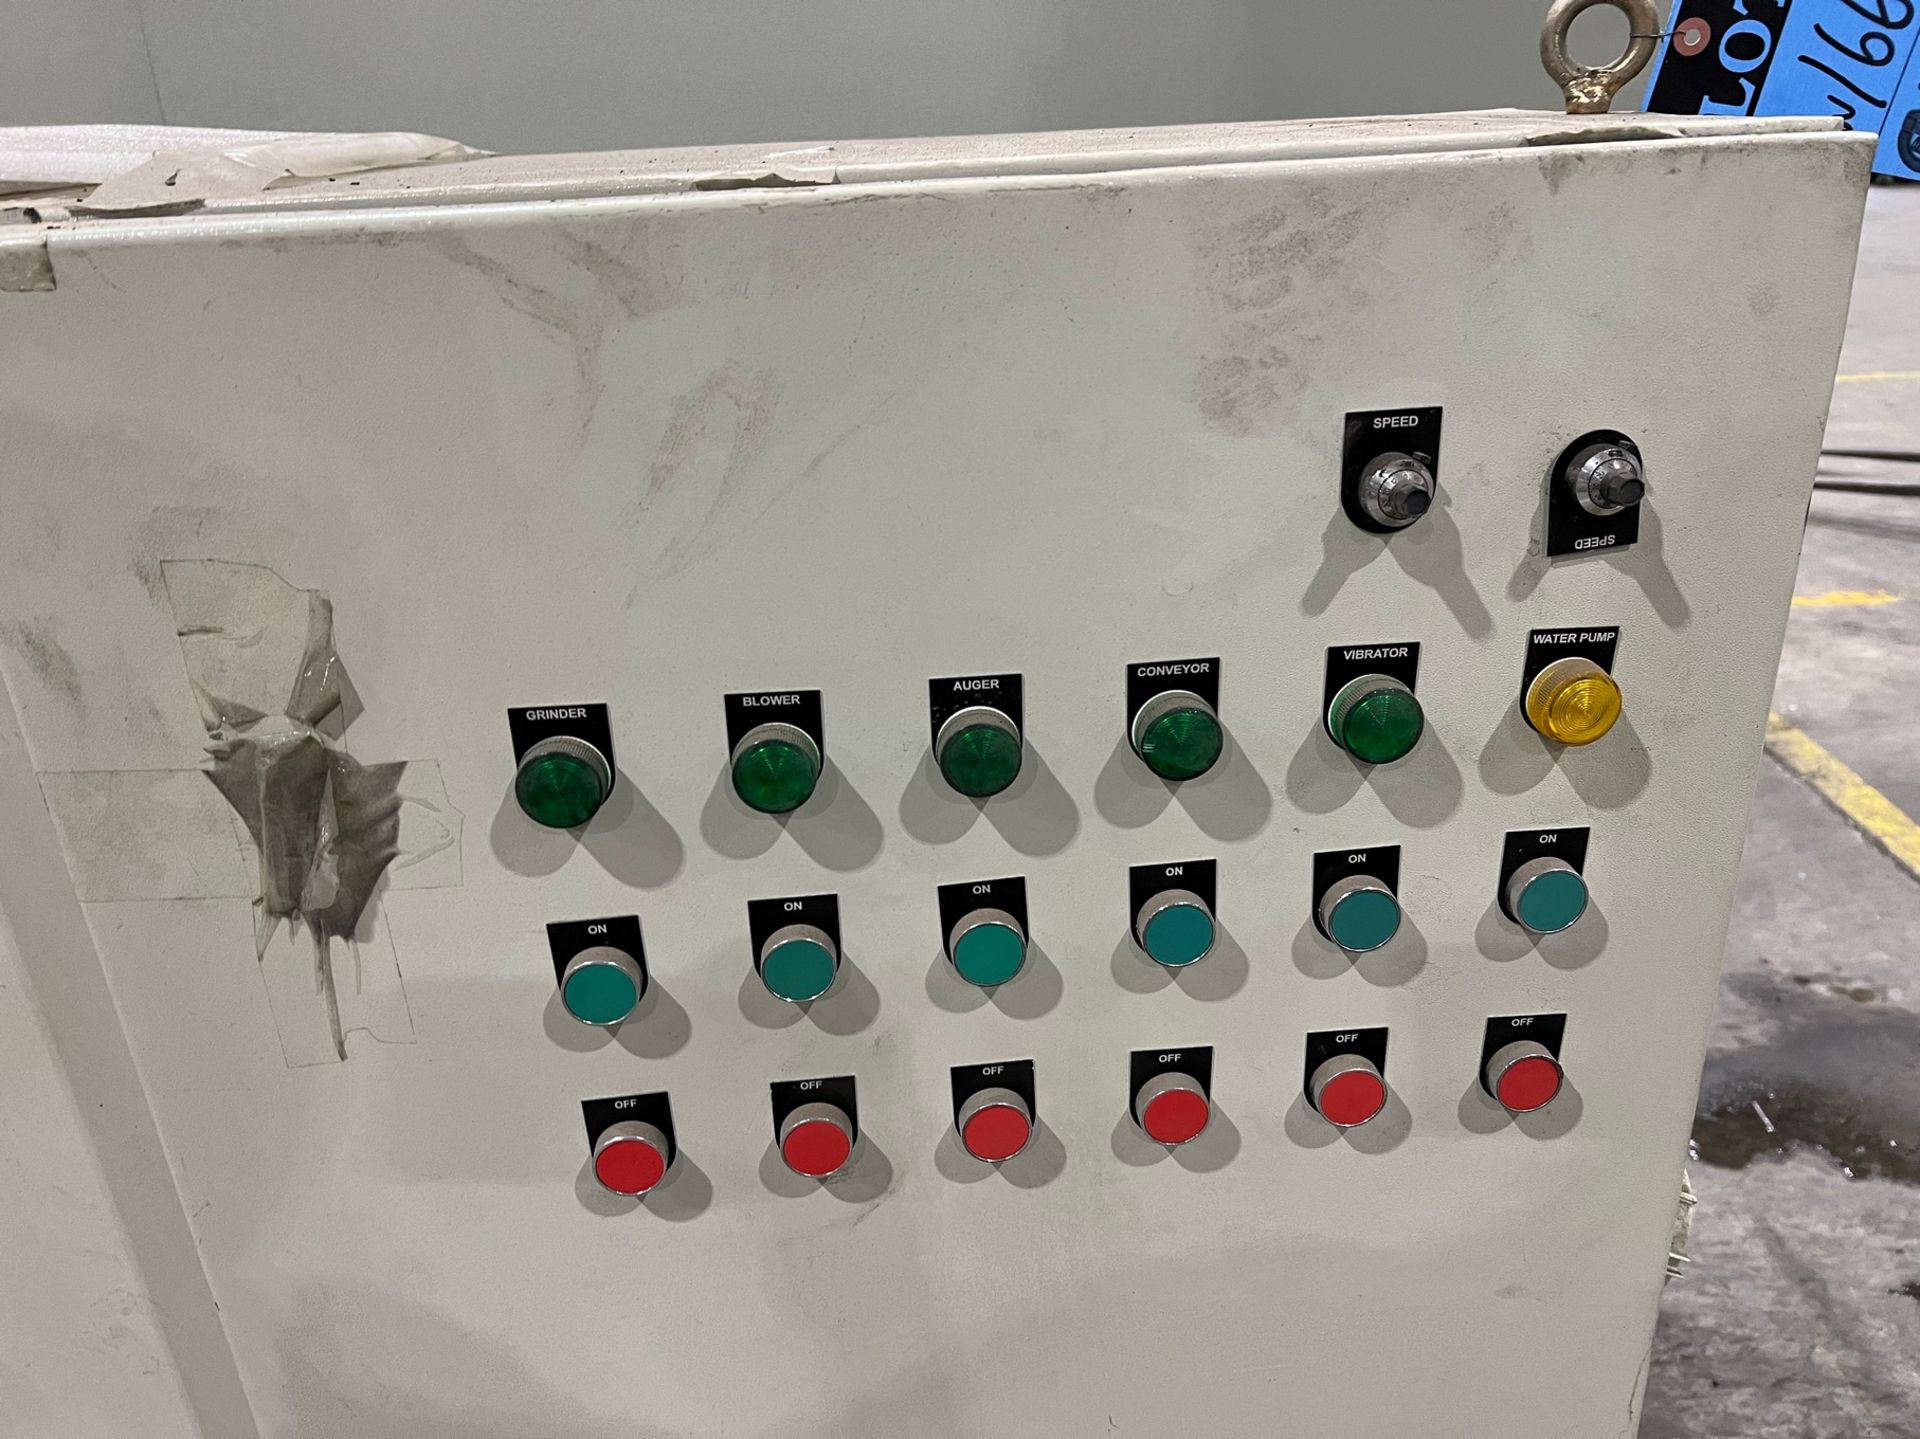 WASH LINE CONTROL PANELS, START/STOP CONTROL BUTTONS, YASKAWA AND ABB Drives - Image 4 of 16